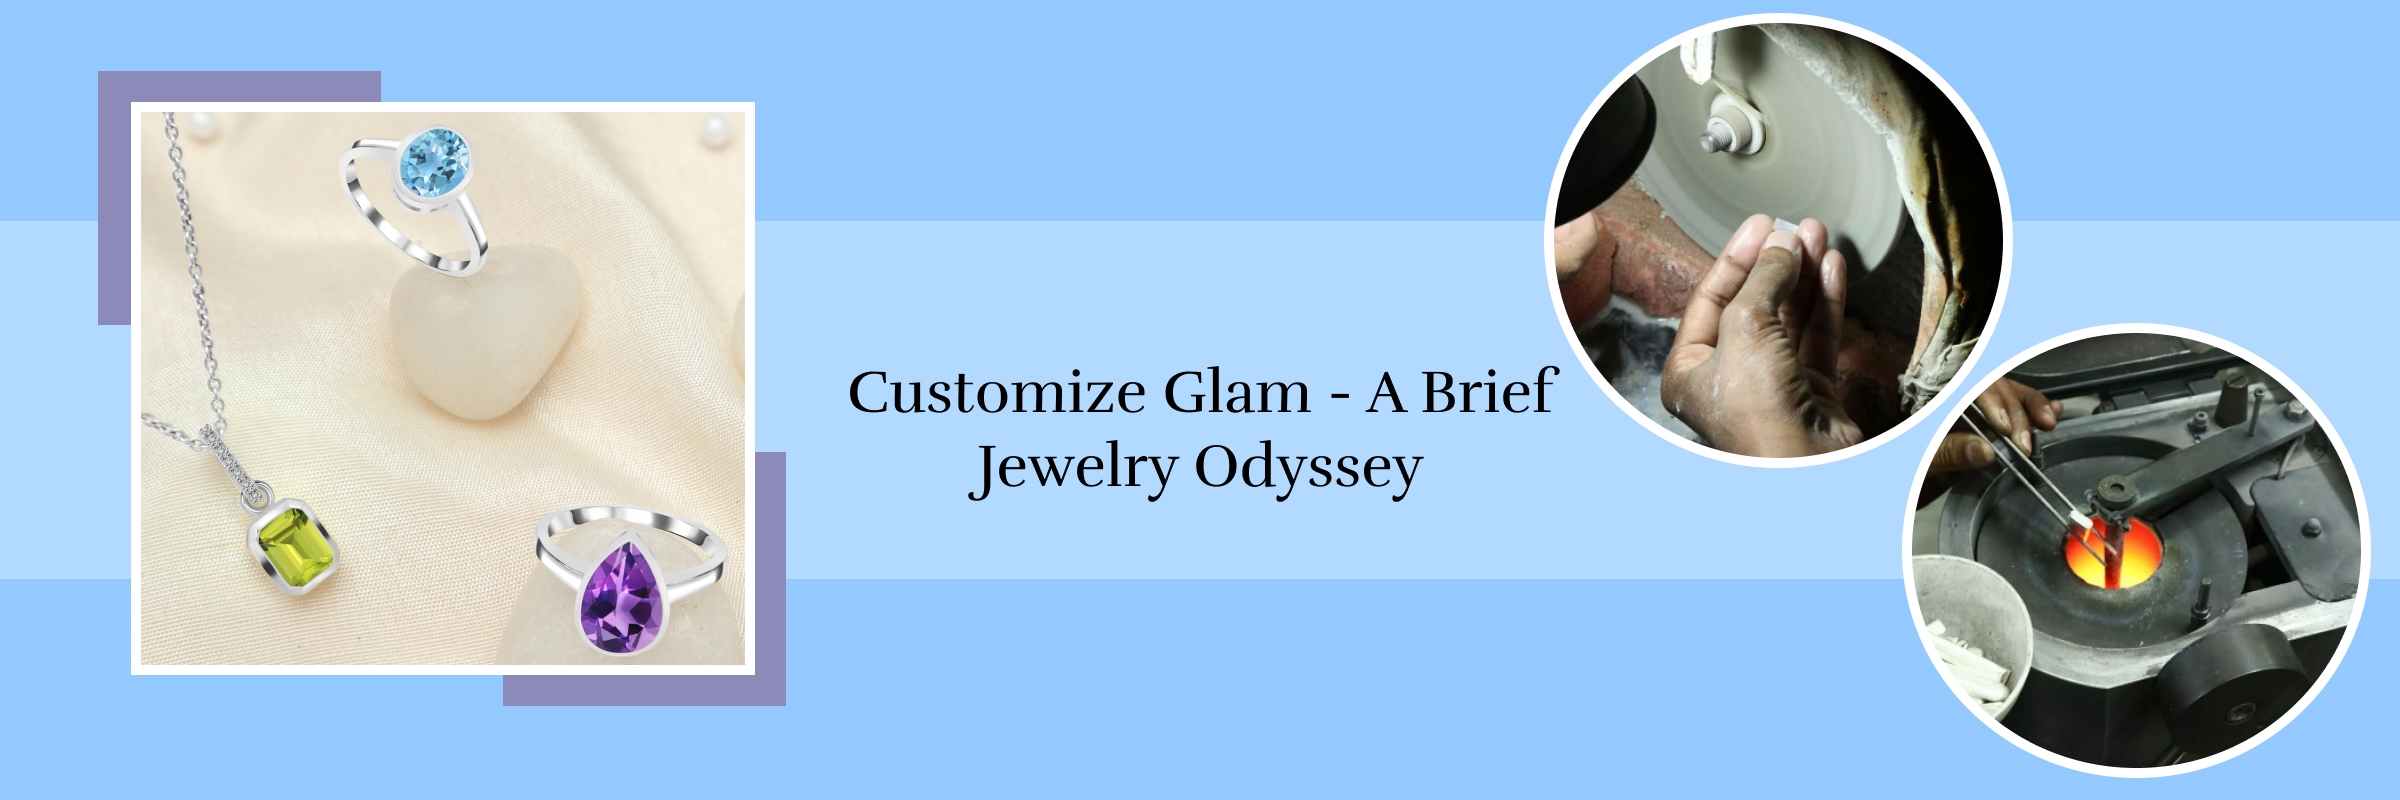 Brief Guide on Statement Jewelry & How to Customize It?